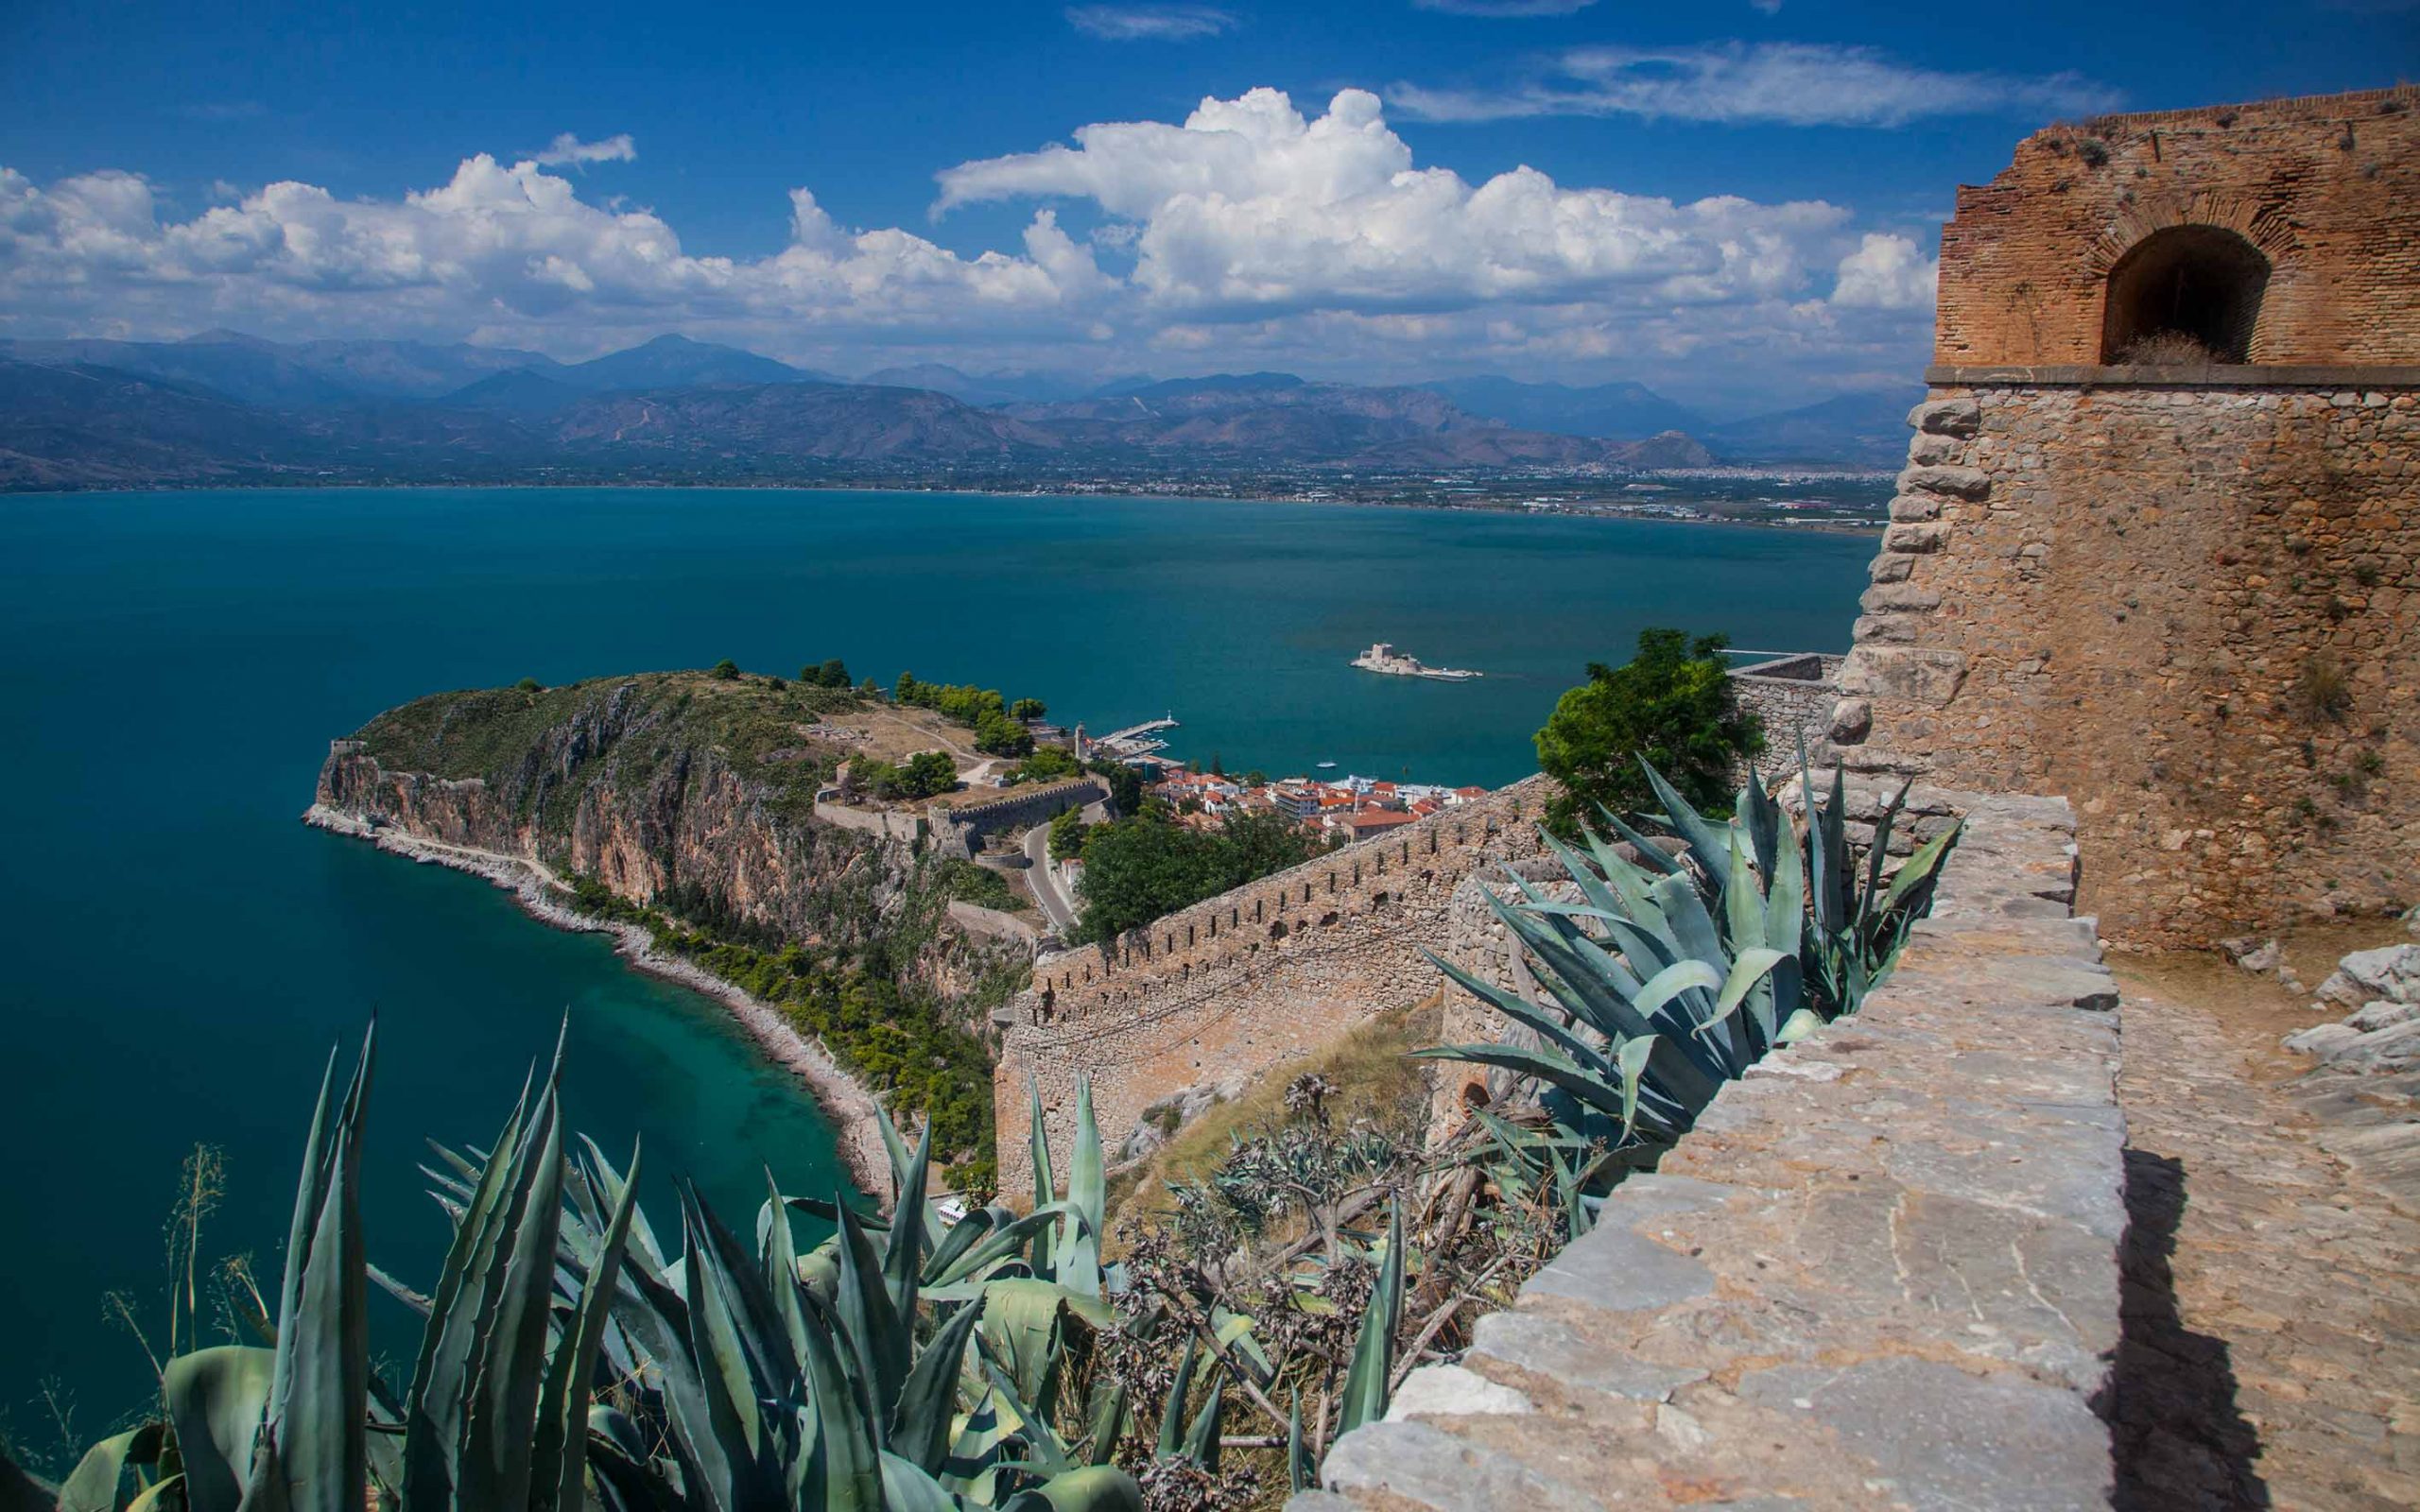 nafplio-a-perfect-blend-of-romance-history-and-nature1